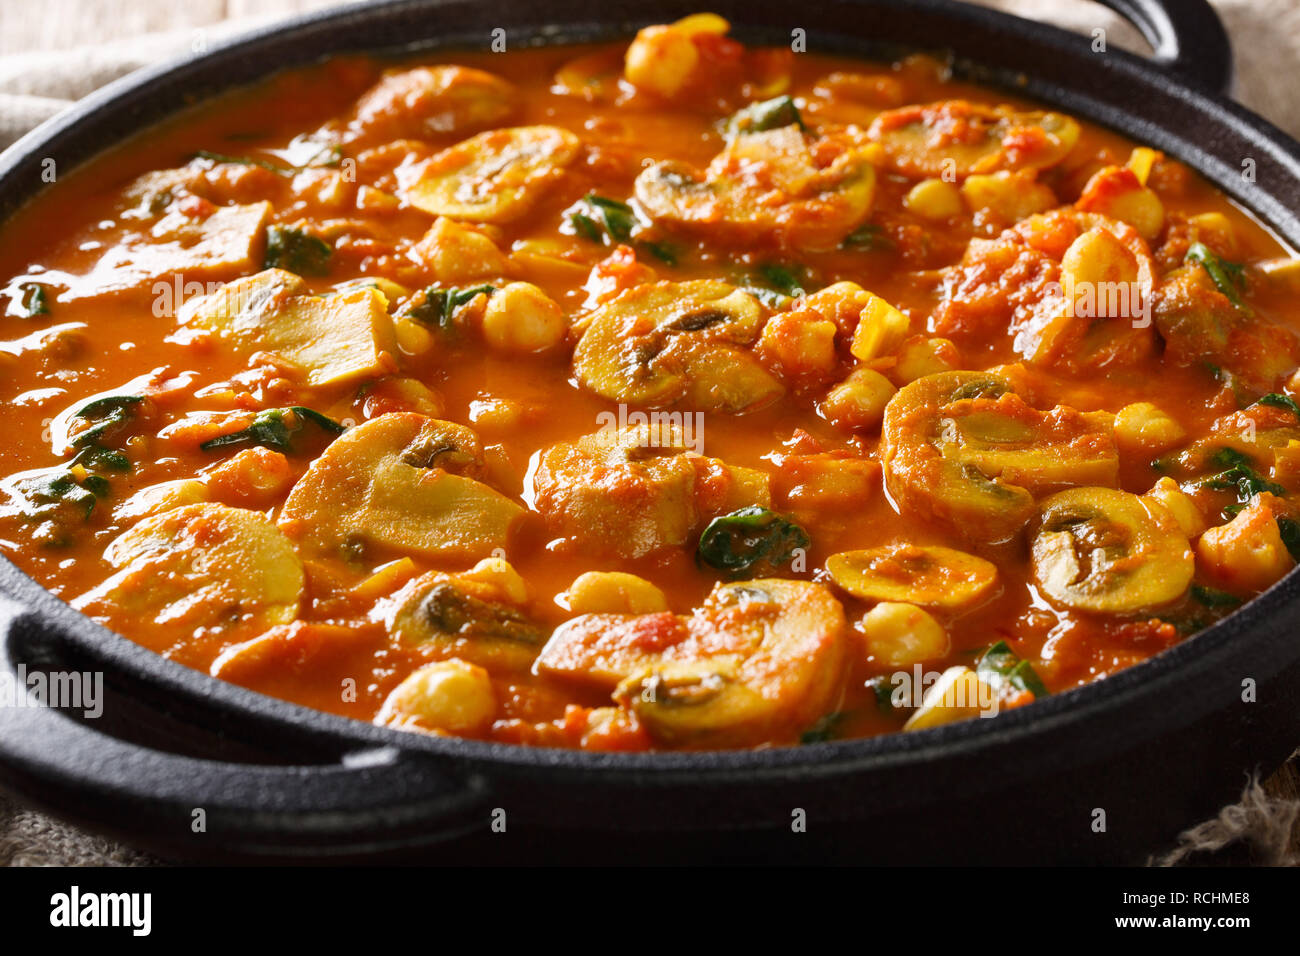 Hot Asian mushroom curry with spinach and chickpeas close-up in a frying pan. horizontal Stock Photo